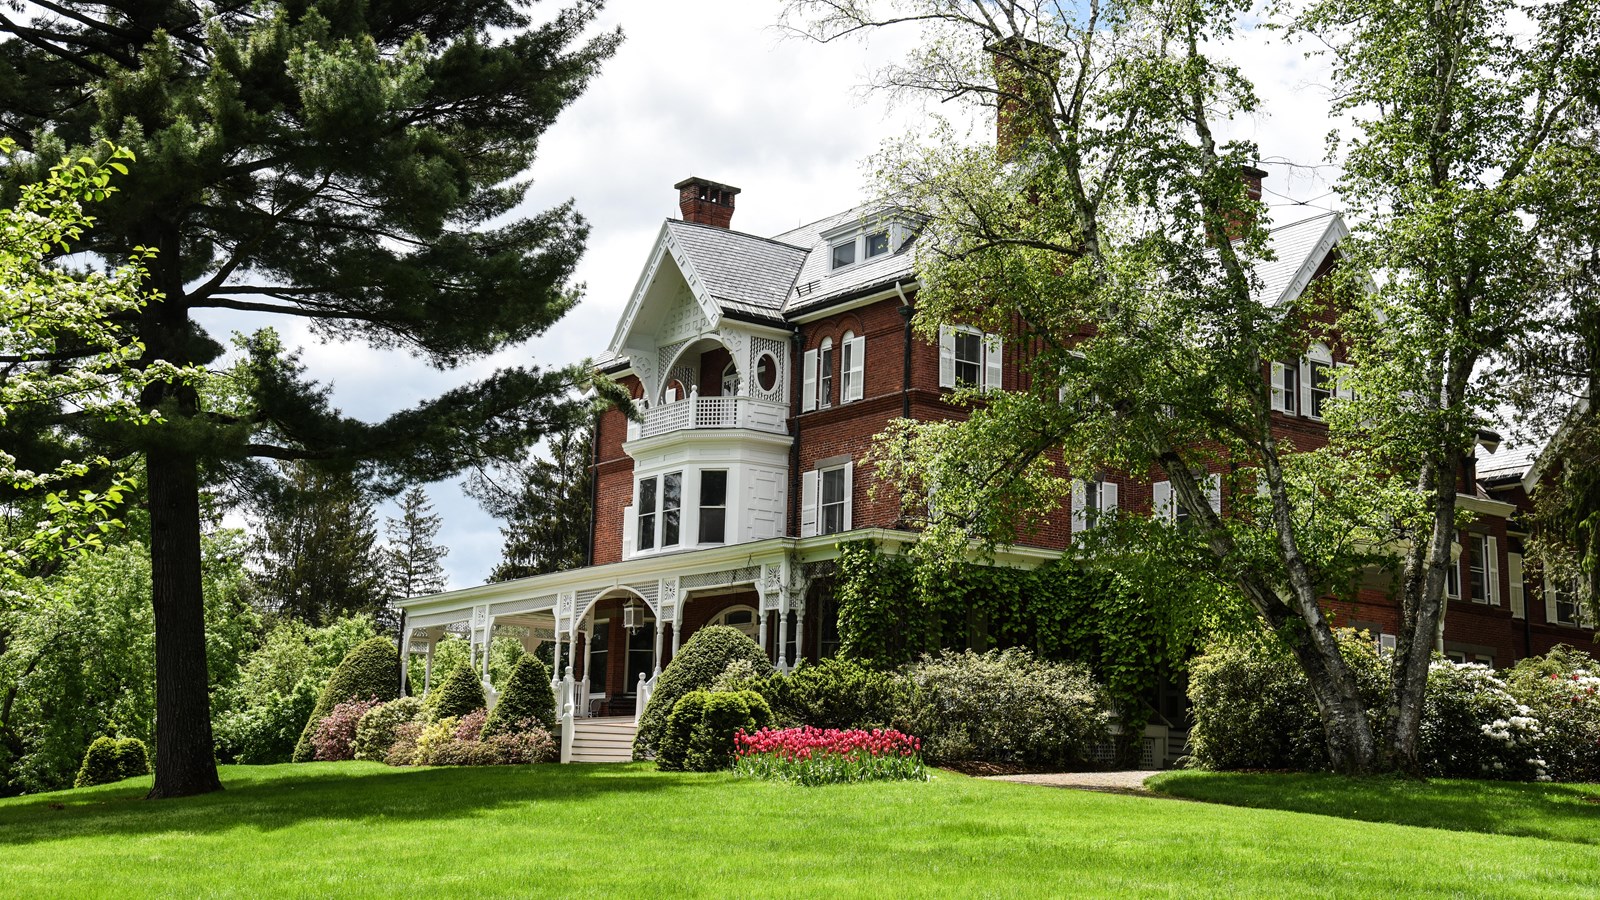 Queen Anne style red brick mansion with white detailing